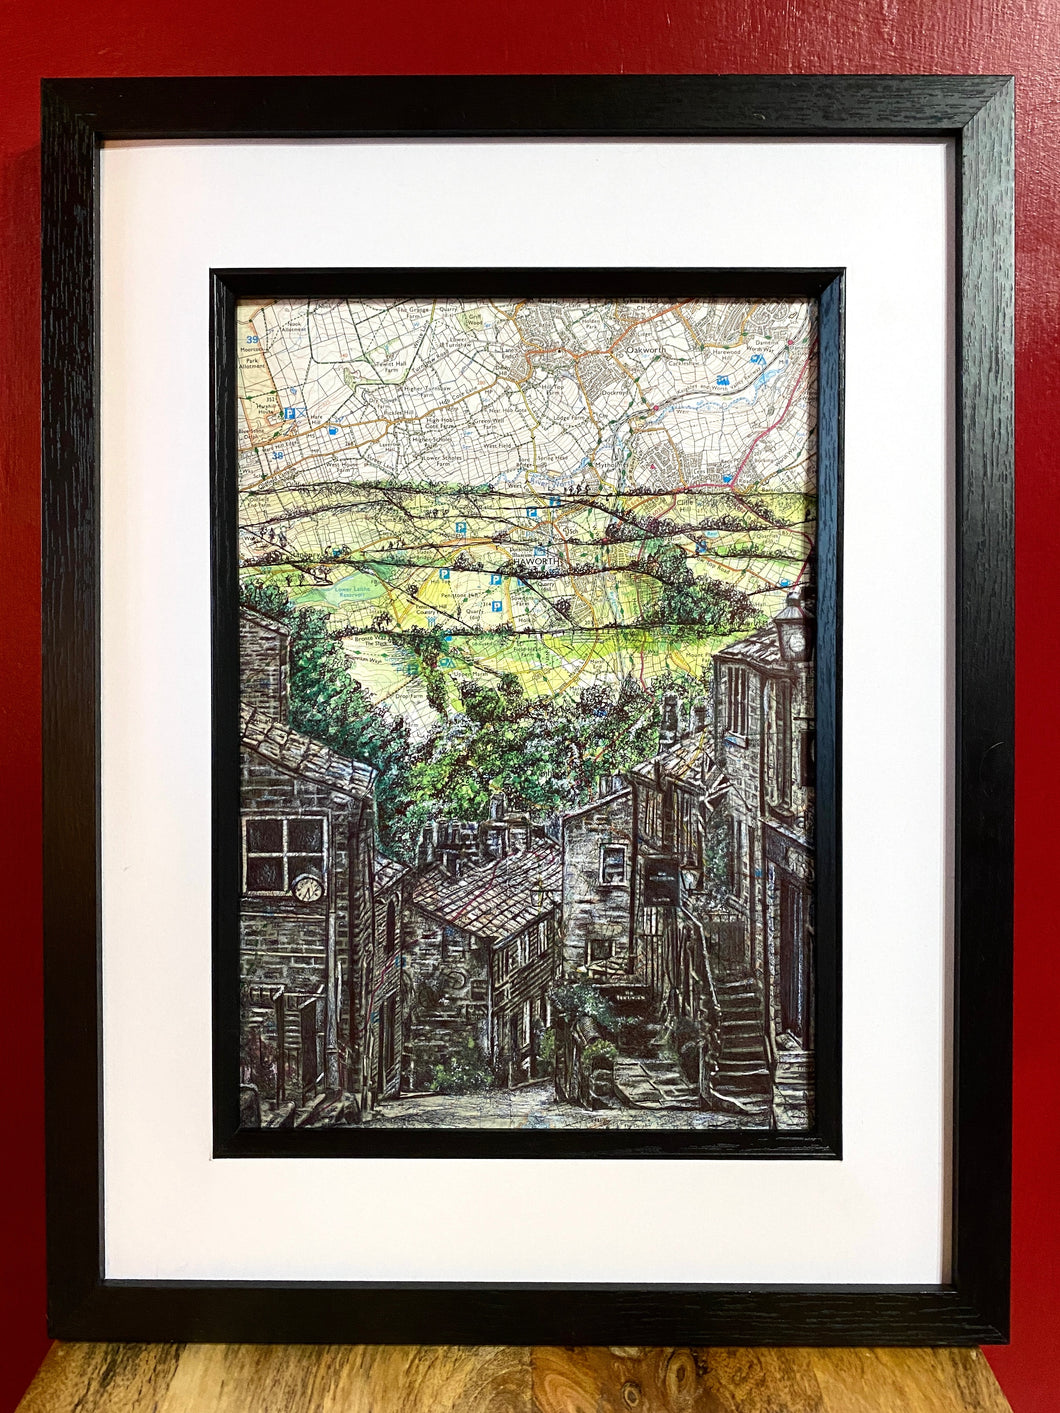 Haworth, West Yorkshire Art Print. Pen and watercolour over map. A4 Unframed